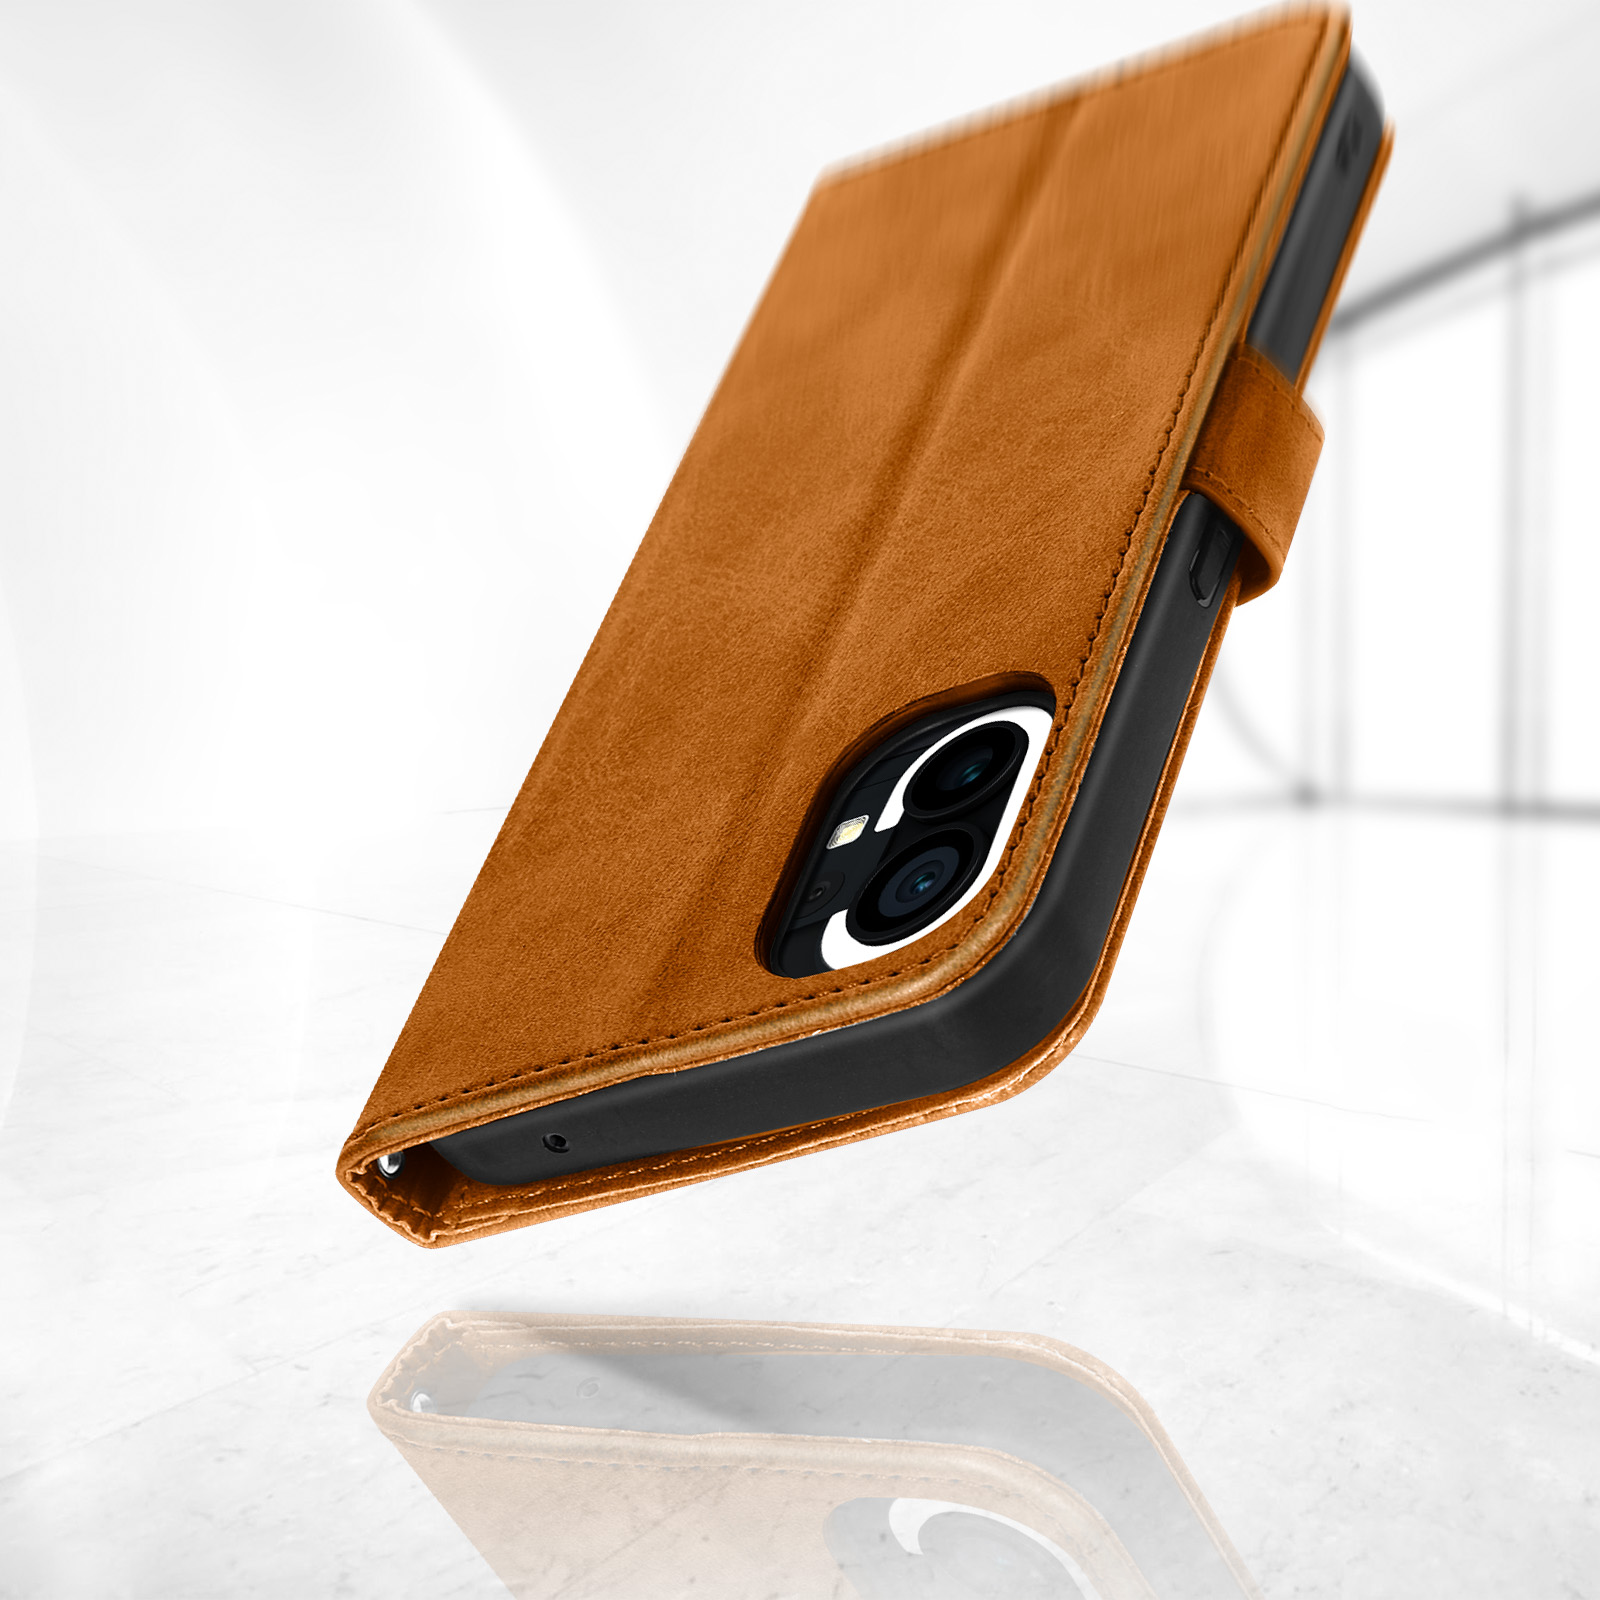 Nothing, Bookstyle 1, Phone Bookcover, Series, Camel AVIZAR